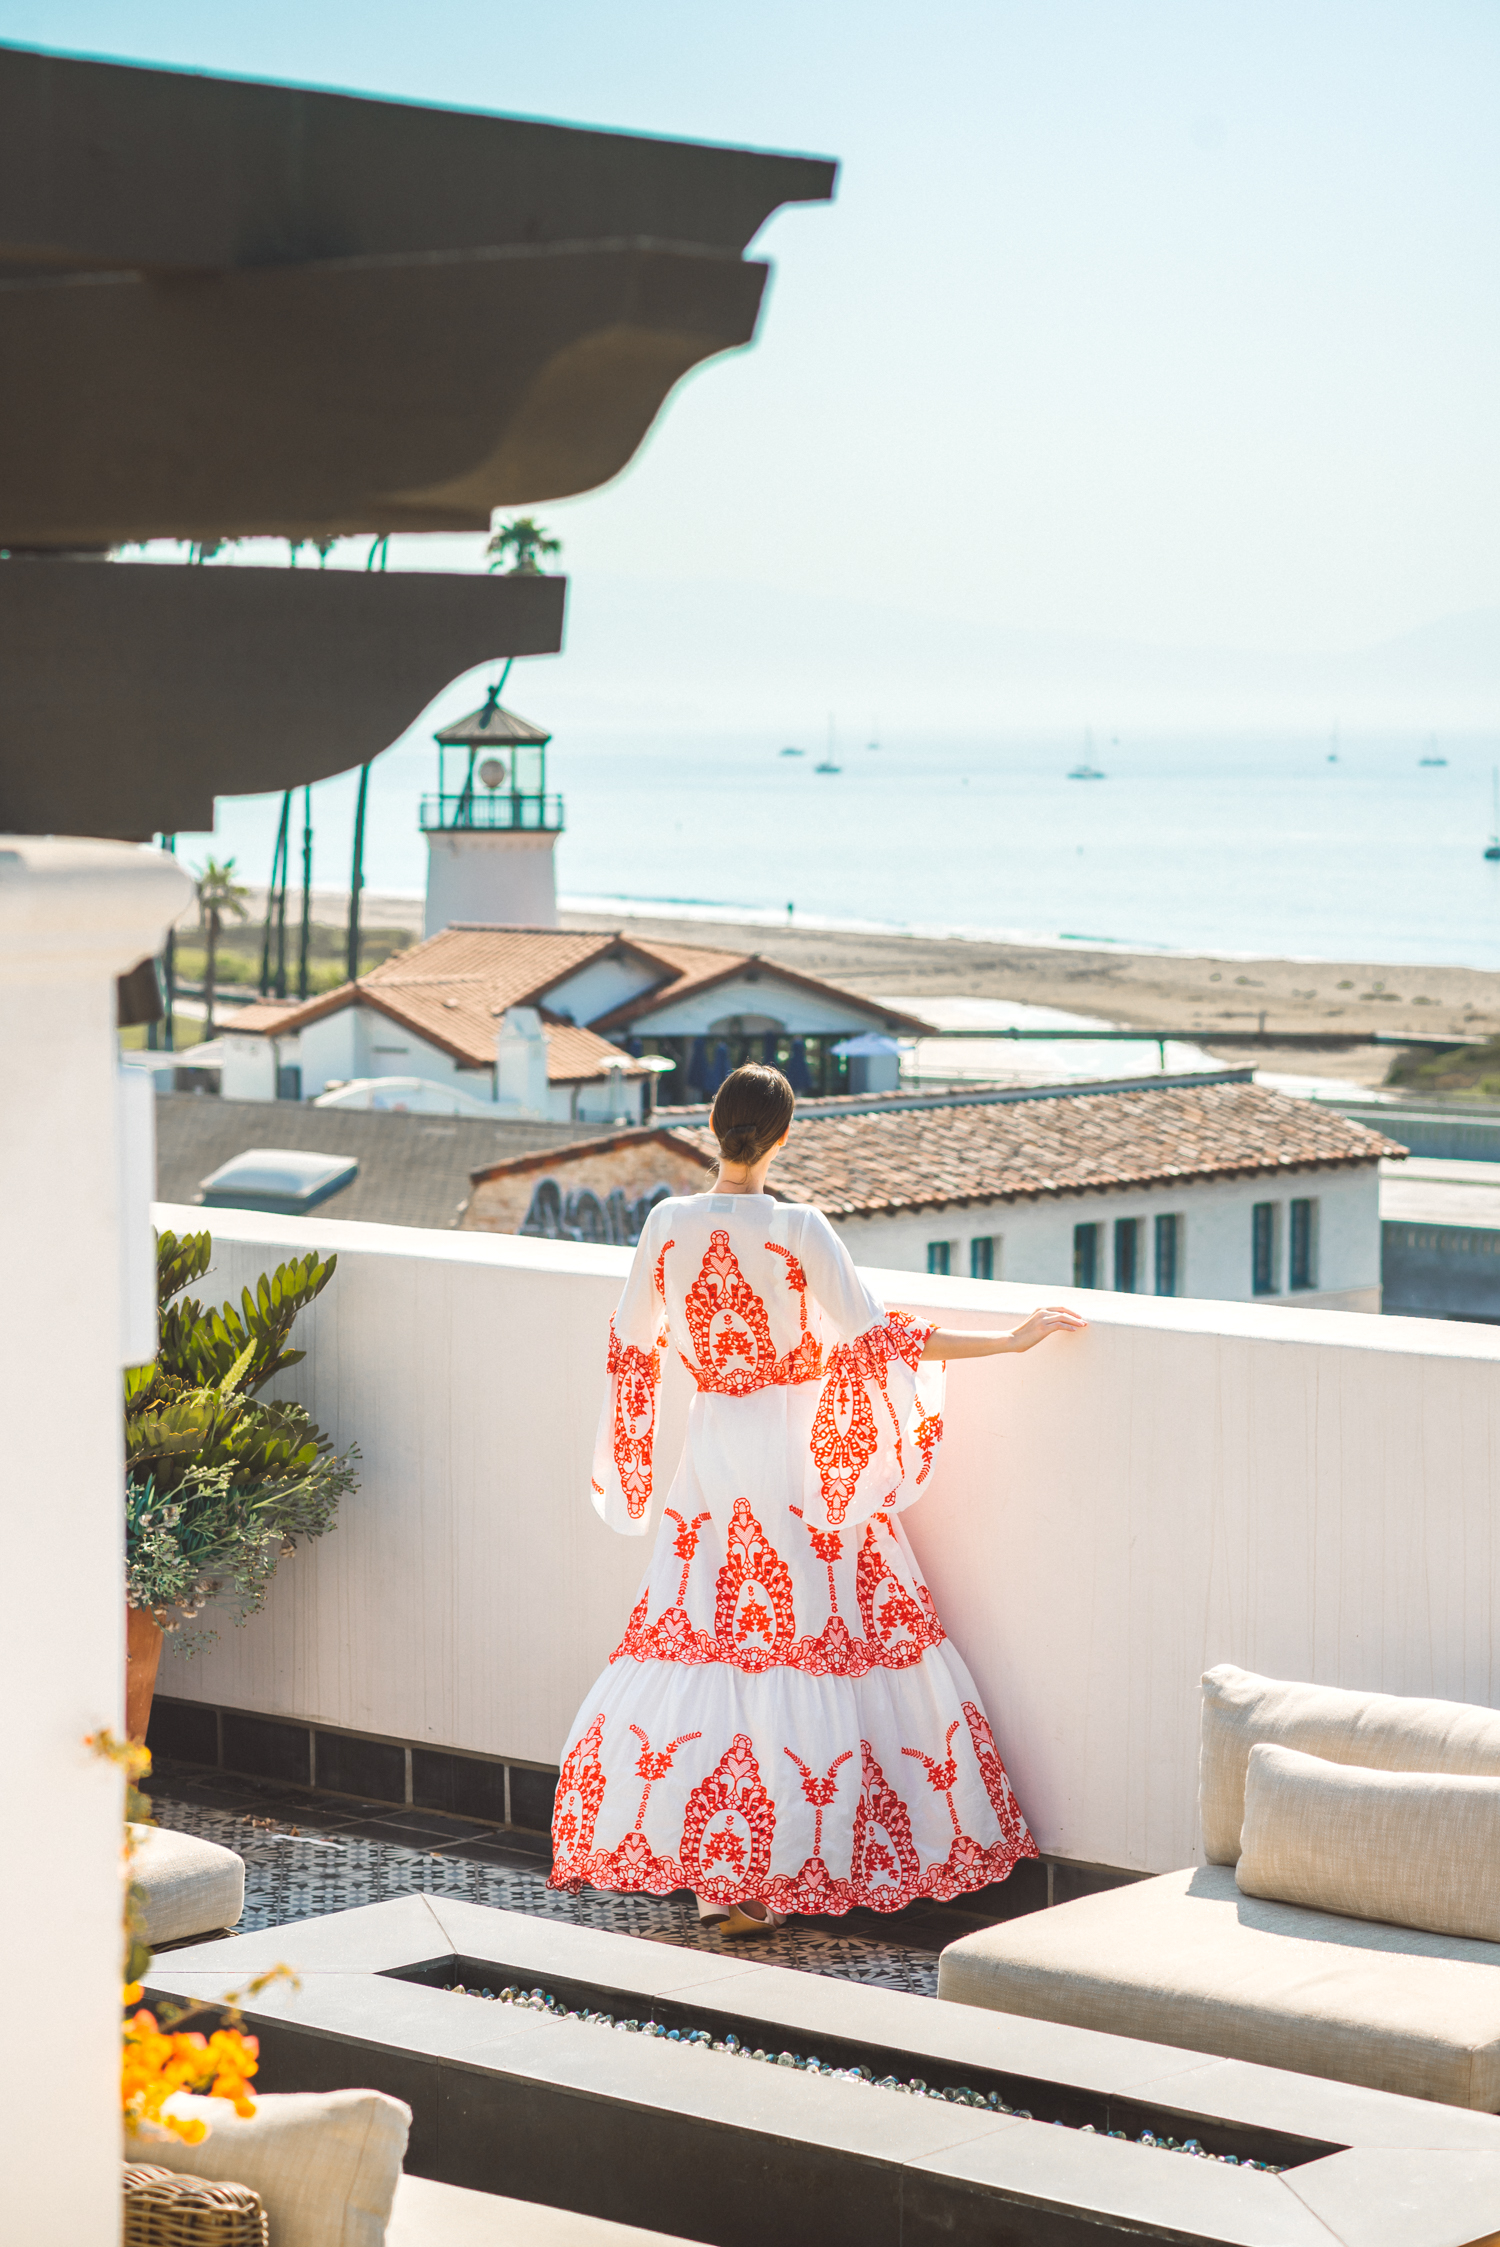 Alyssa Campanella of The A List blog visits Hotel Californian in Santa Barbara with Torrance Coombs wearing We Are Leone embroidered maxi dress for an anniversary trip.